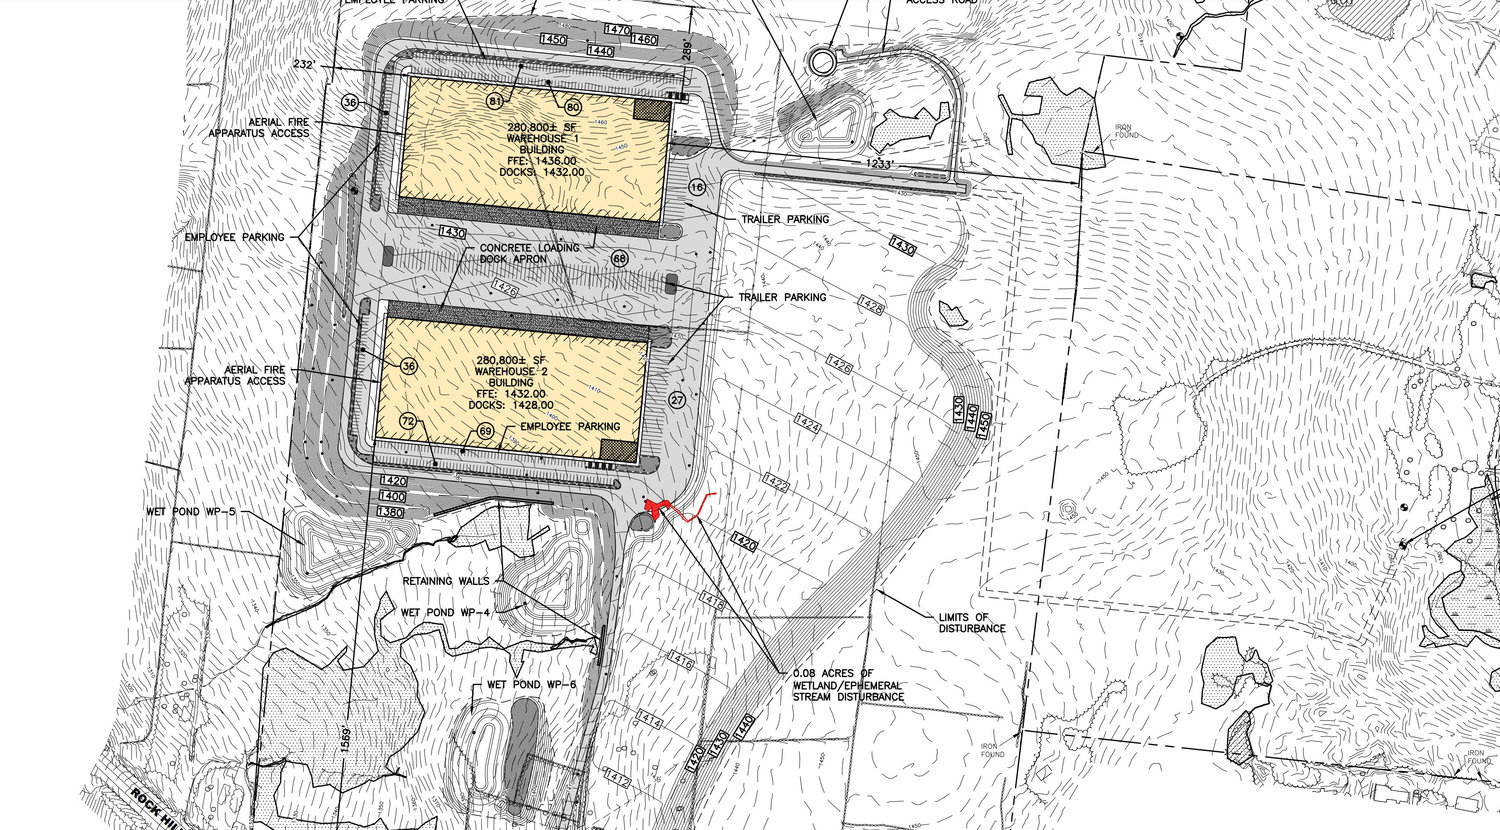 Glen Wild Land Co. LLC wants to build 560,000 square feet of e-commerce warehouse space in two buildings on the dead-end road of Rock Hill Drive.